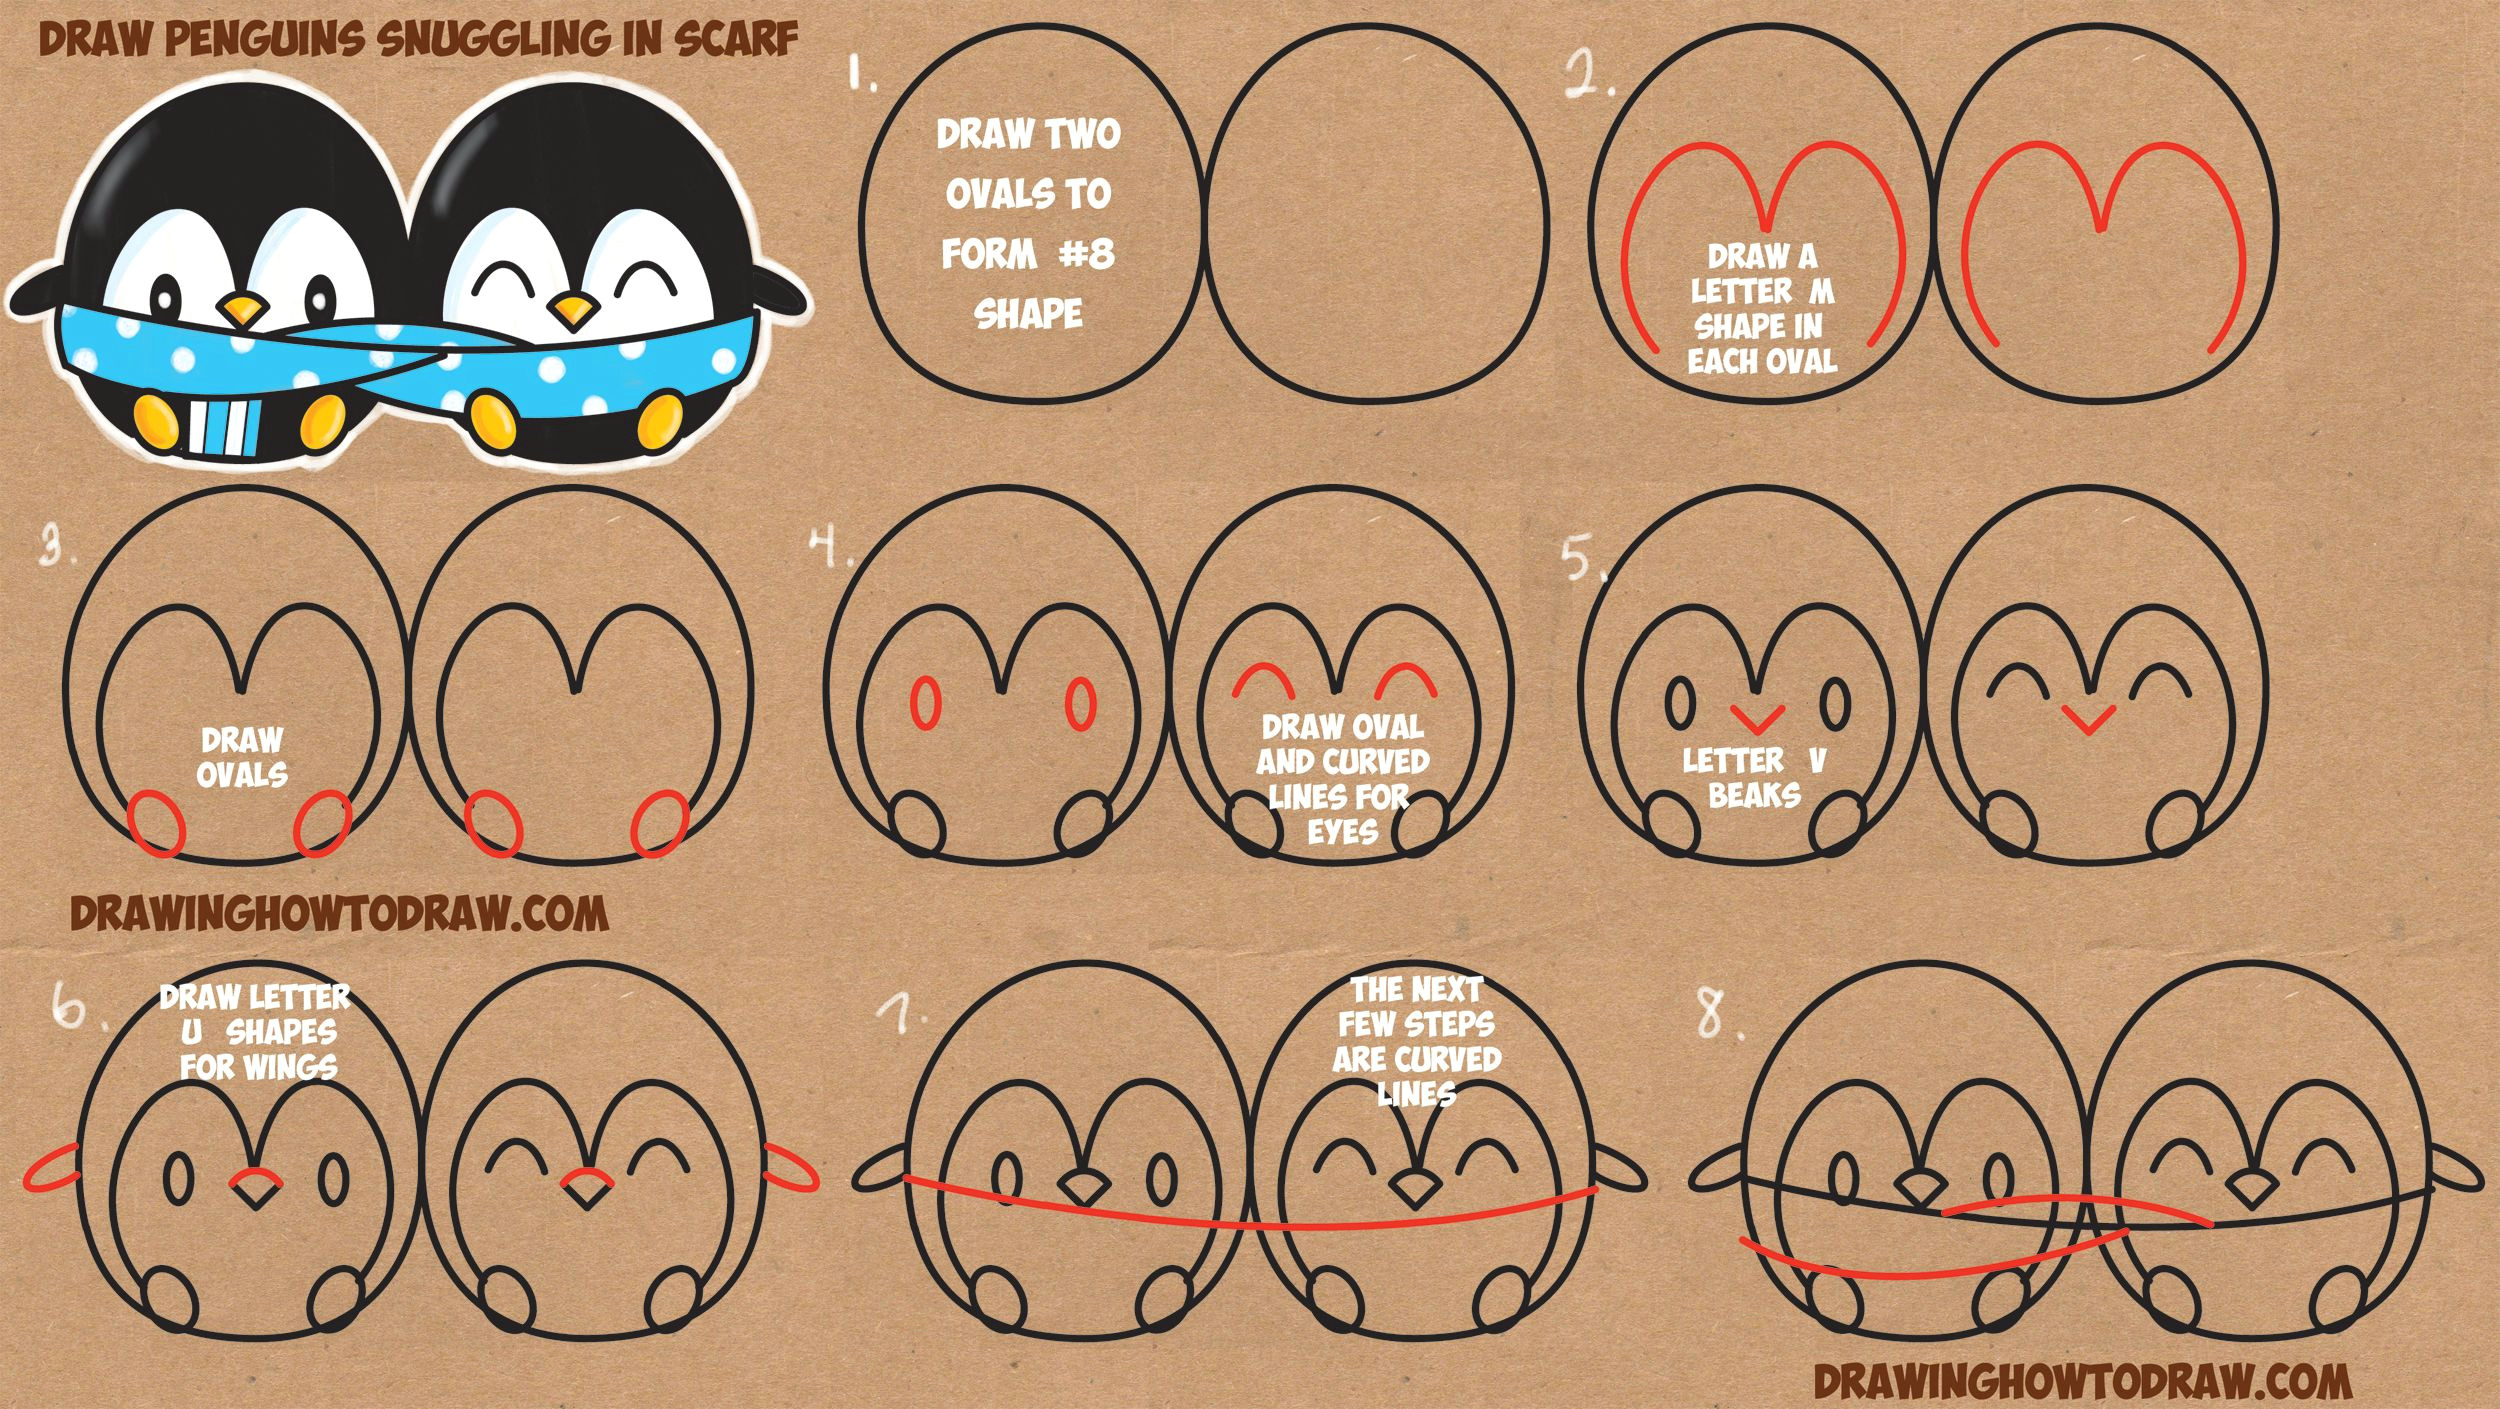 Drawing Cartoons Chibi How to Draw Cute Kawaii Chibi Cartoon Penguins In A Scarf for